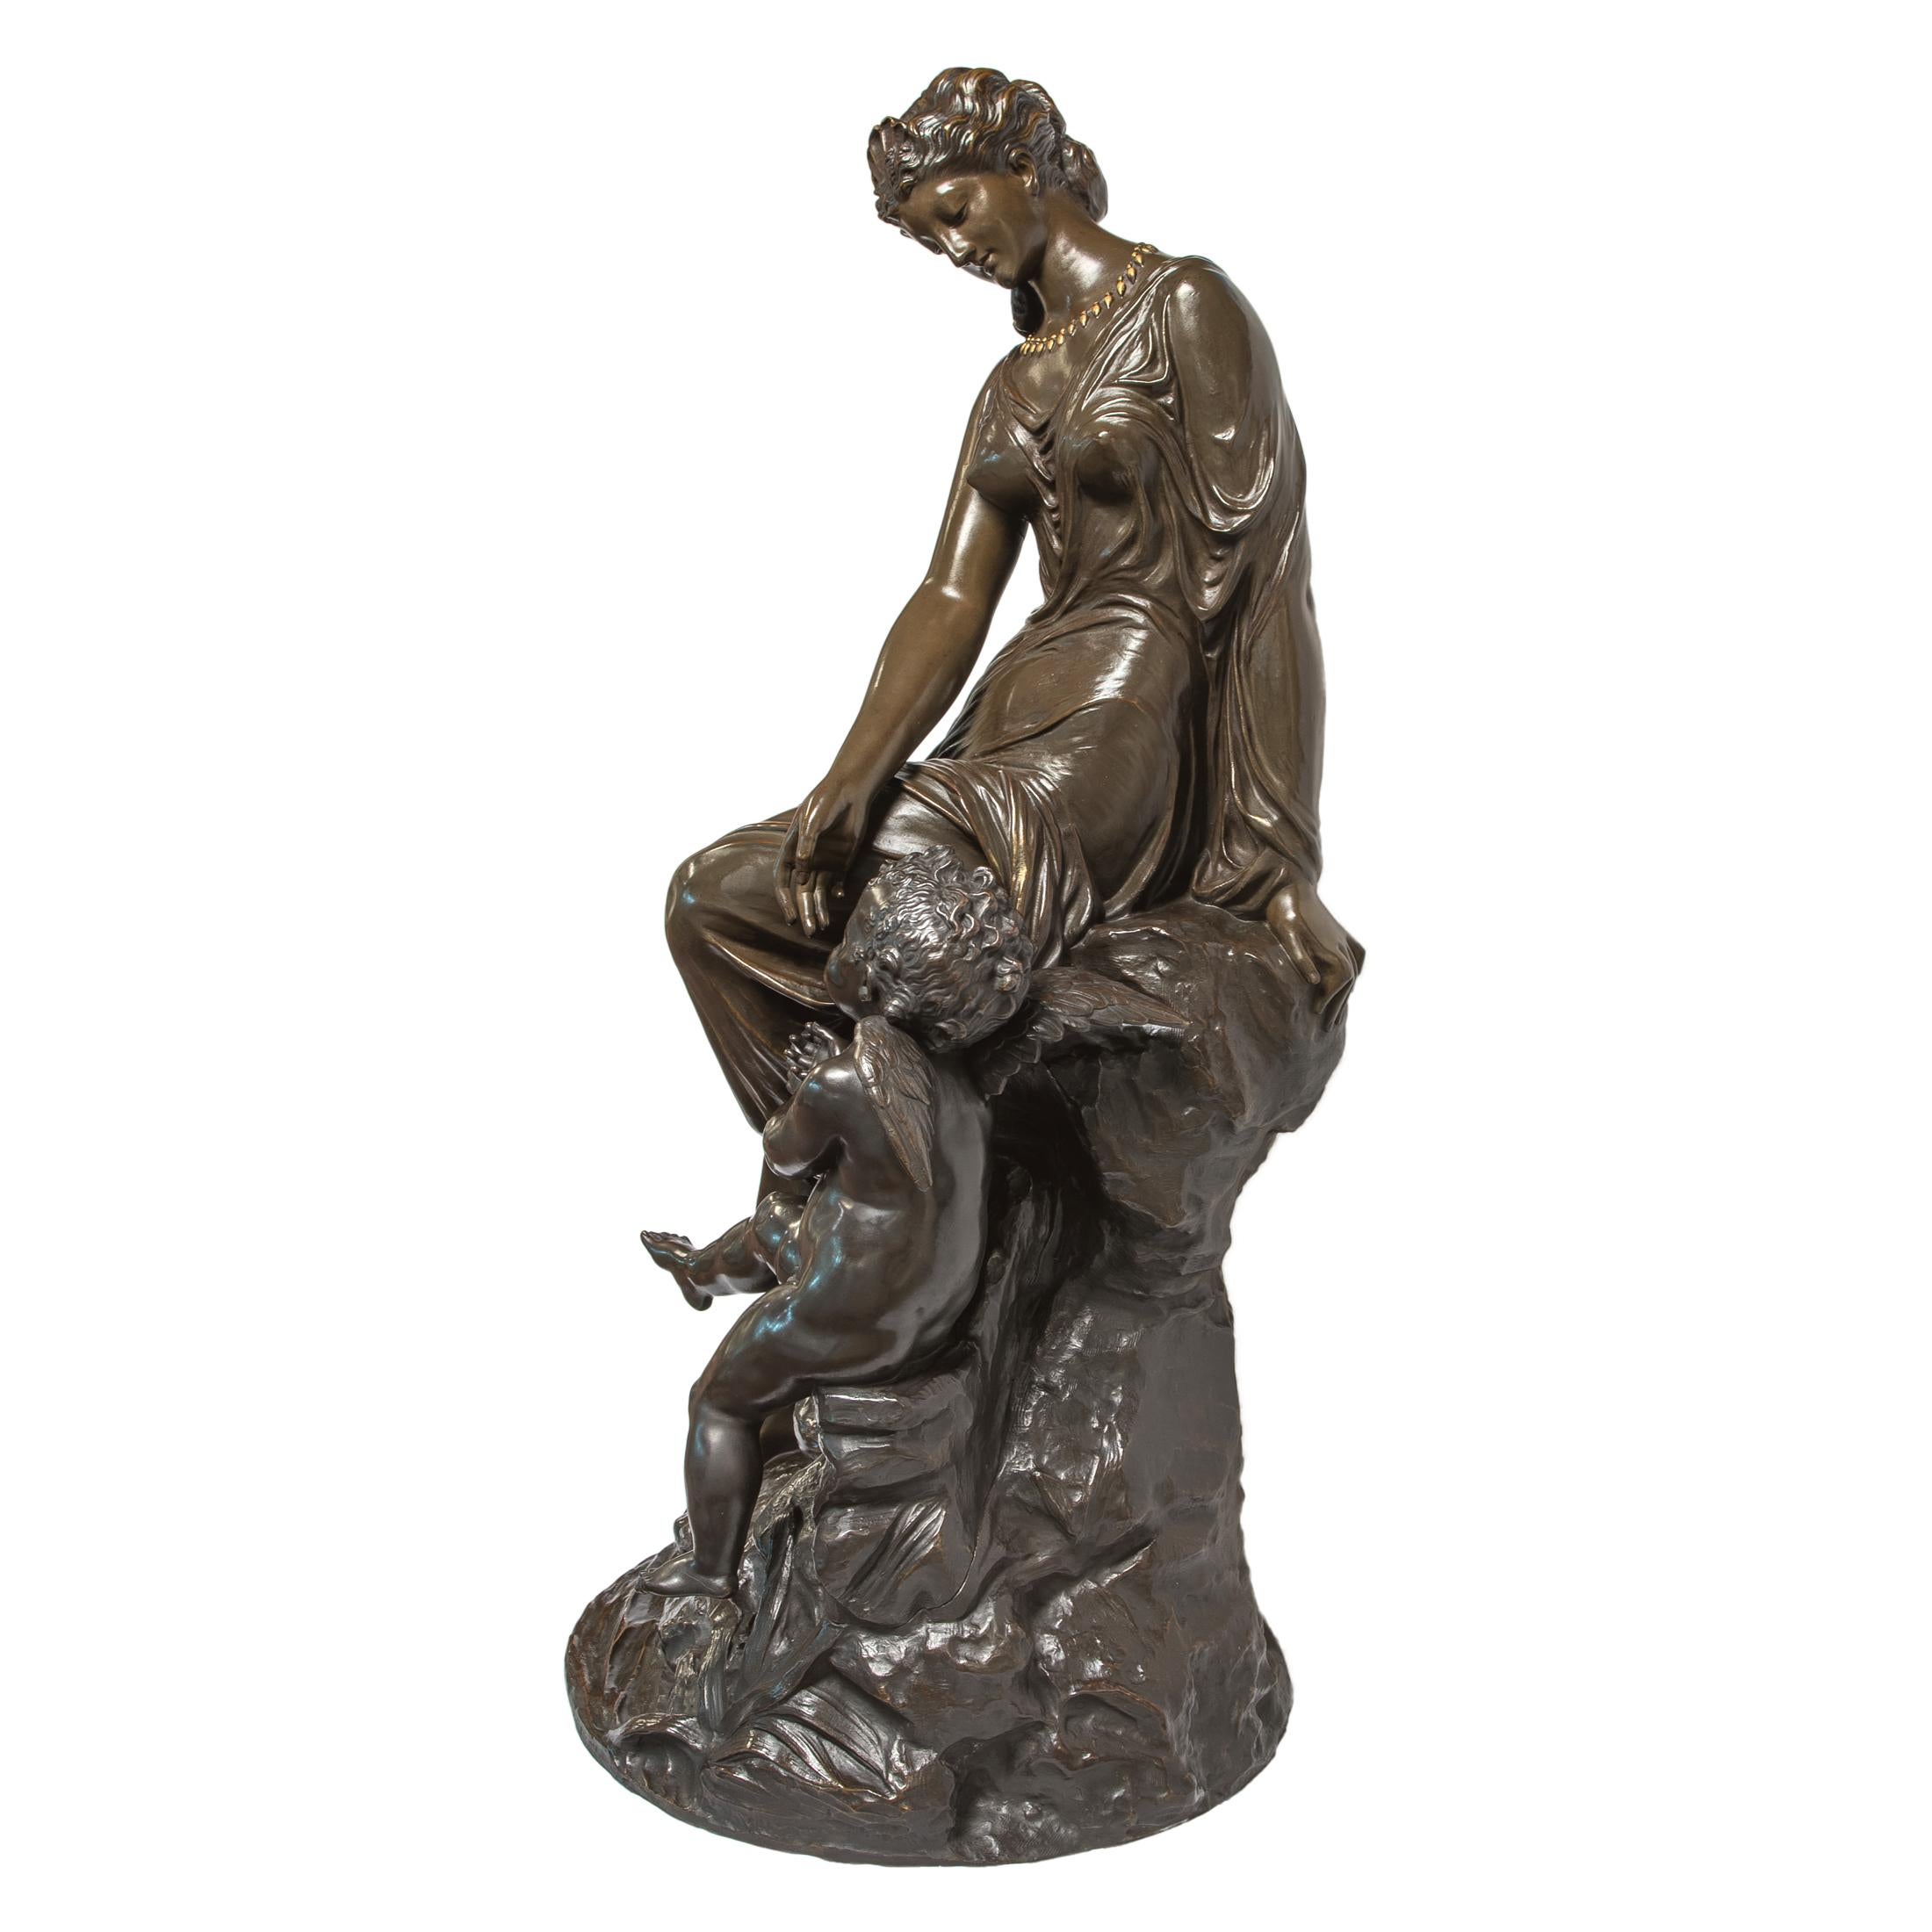 Finely casted monumental patinated bronze sculpture of Venus and Cupid attributed to Mathurin Moreau.

Artist: Attributed to Mathurin Moreau (1822-1912)
Origin: French
Date: Late 19th century
Dimension: 38 in. x 16 1/2 in.